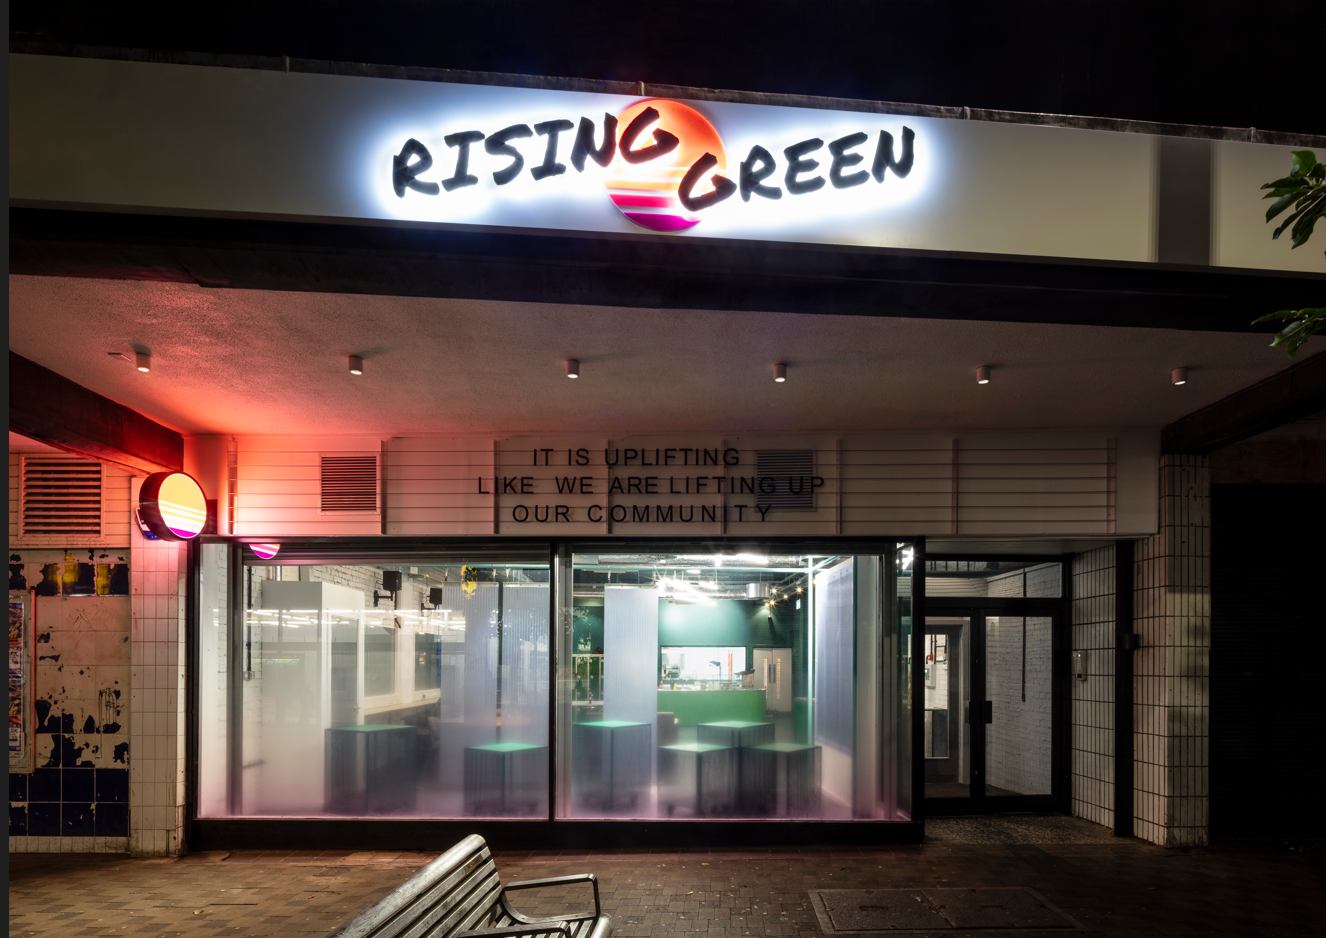 The photograph is of the exterior frontage of the Rising Green Youth Hub in Wood Green at night. Picture by Ben Blossom.